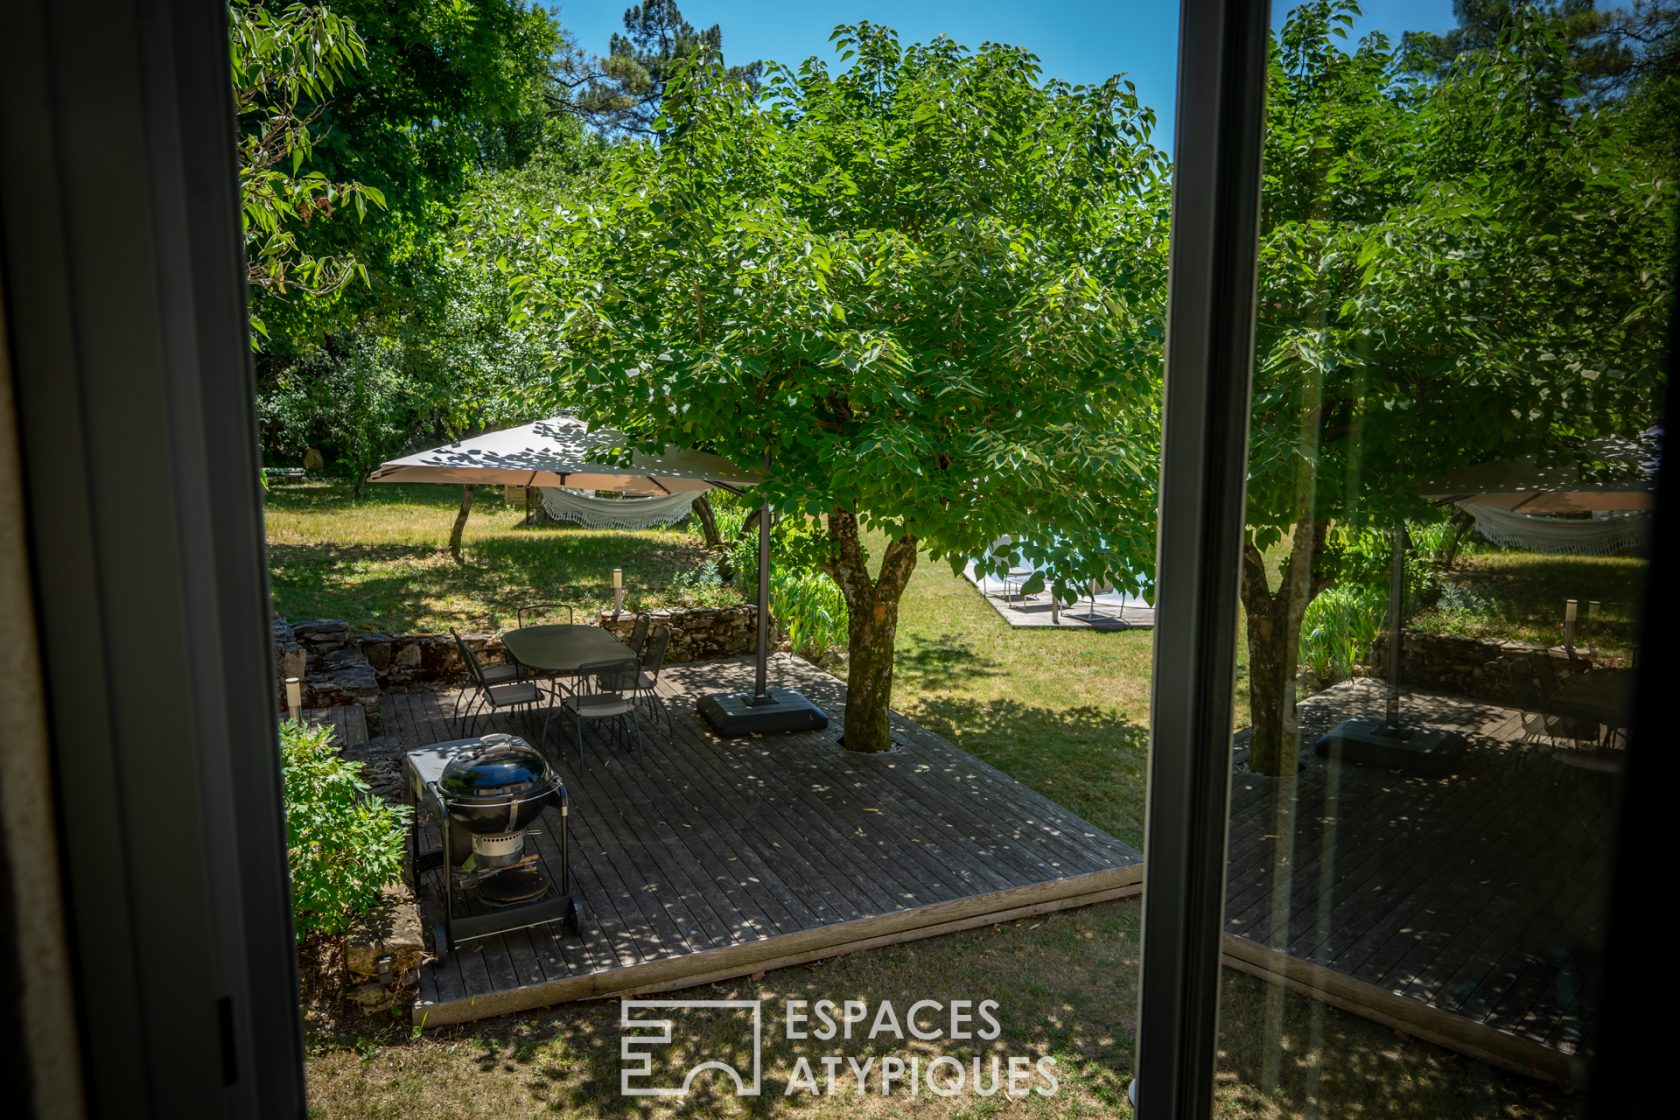 Renovated house, in a quiet area with a nice view, without any nuisance: rare!